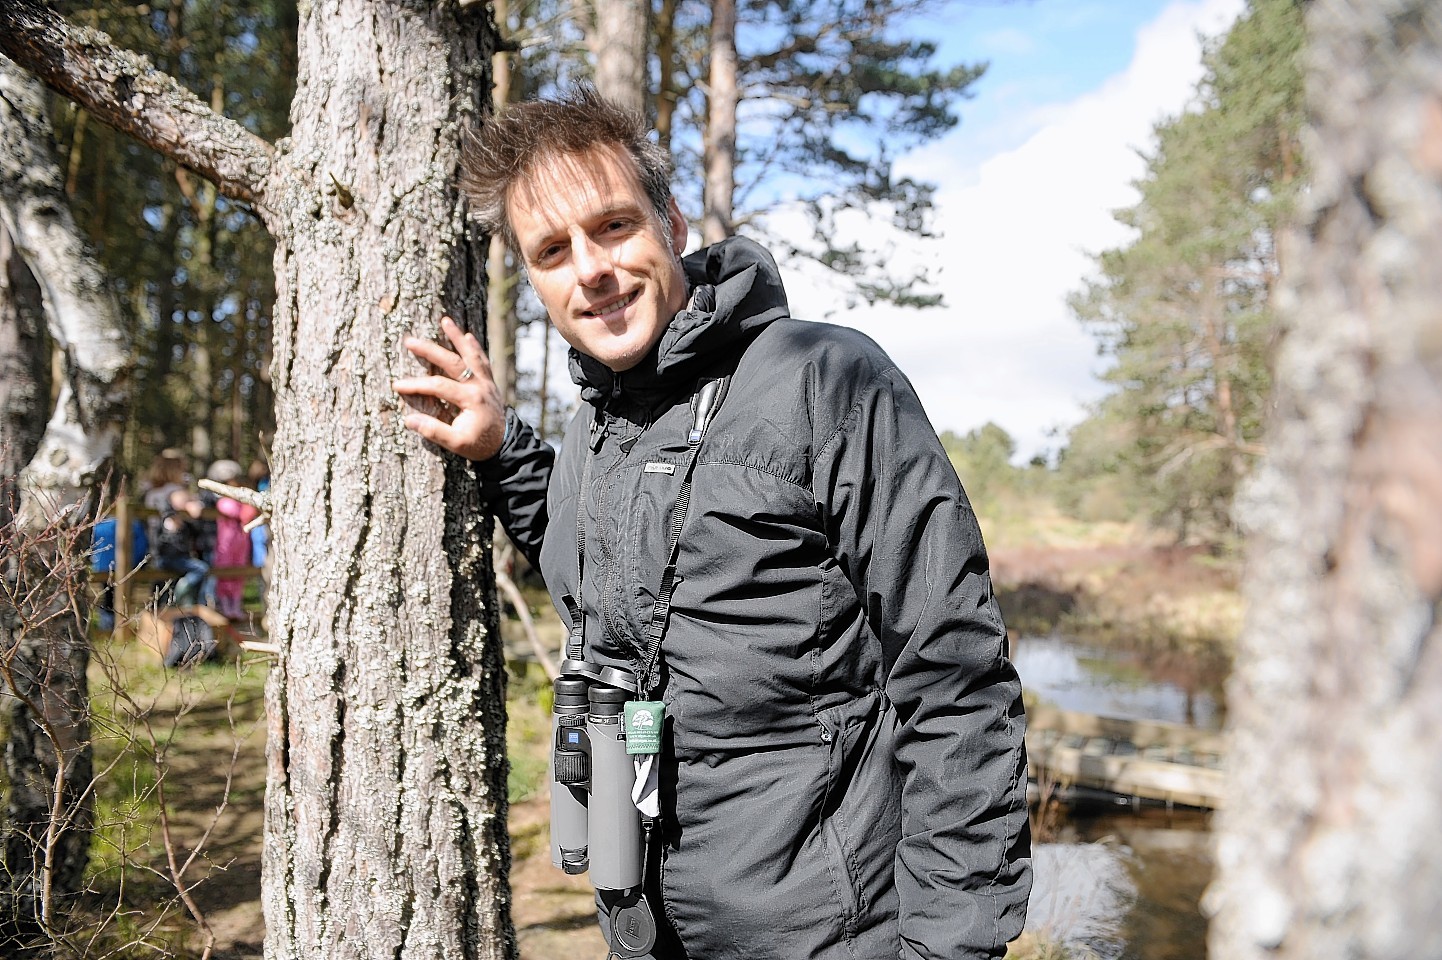 Nick Baker is returning to the Cairngorms Nature Festival